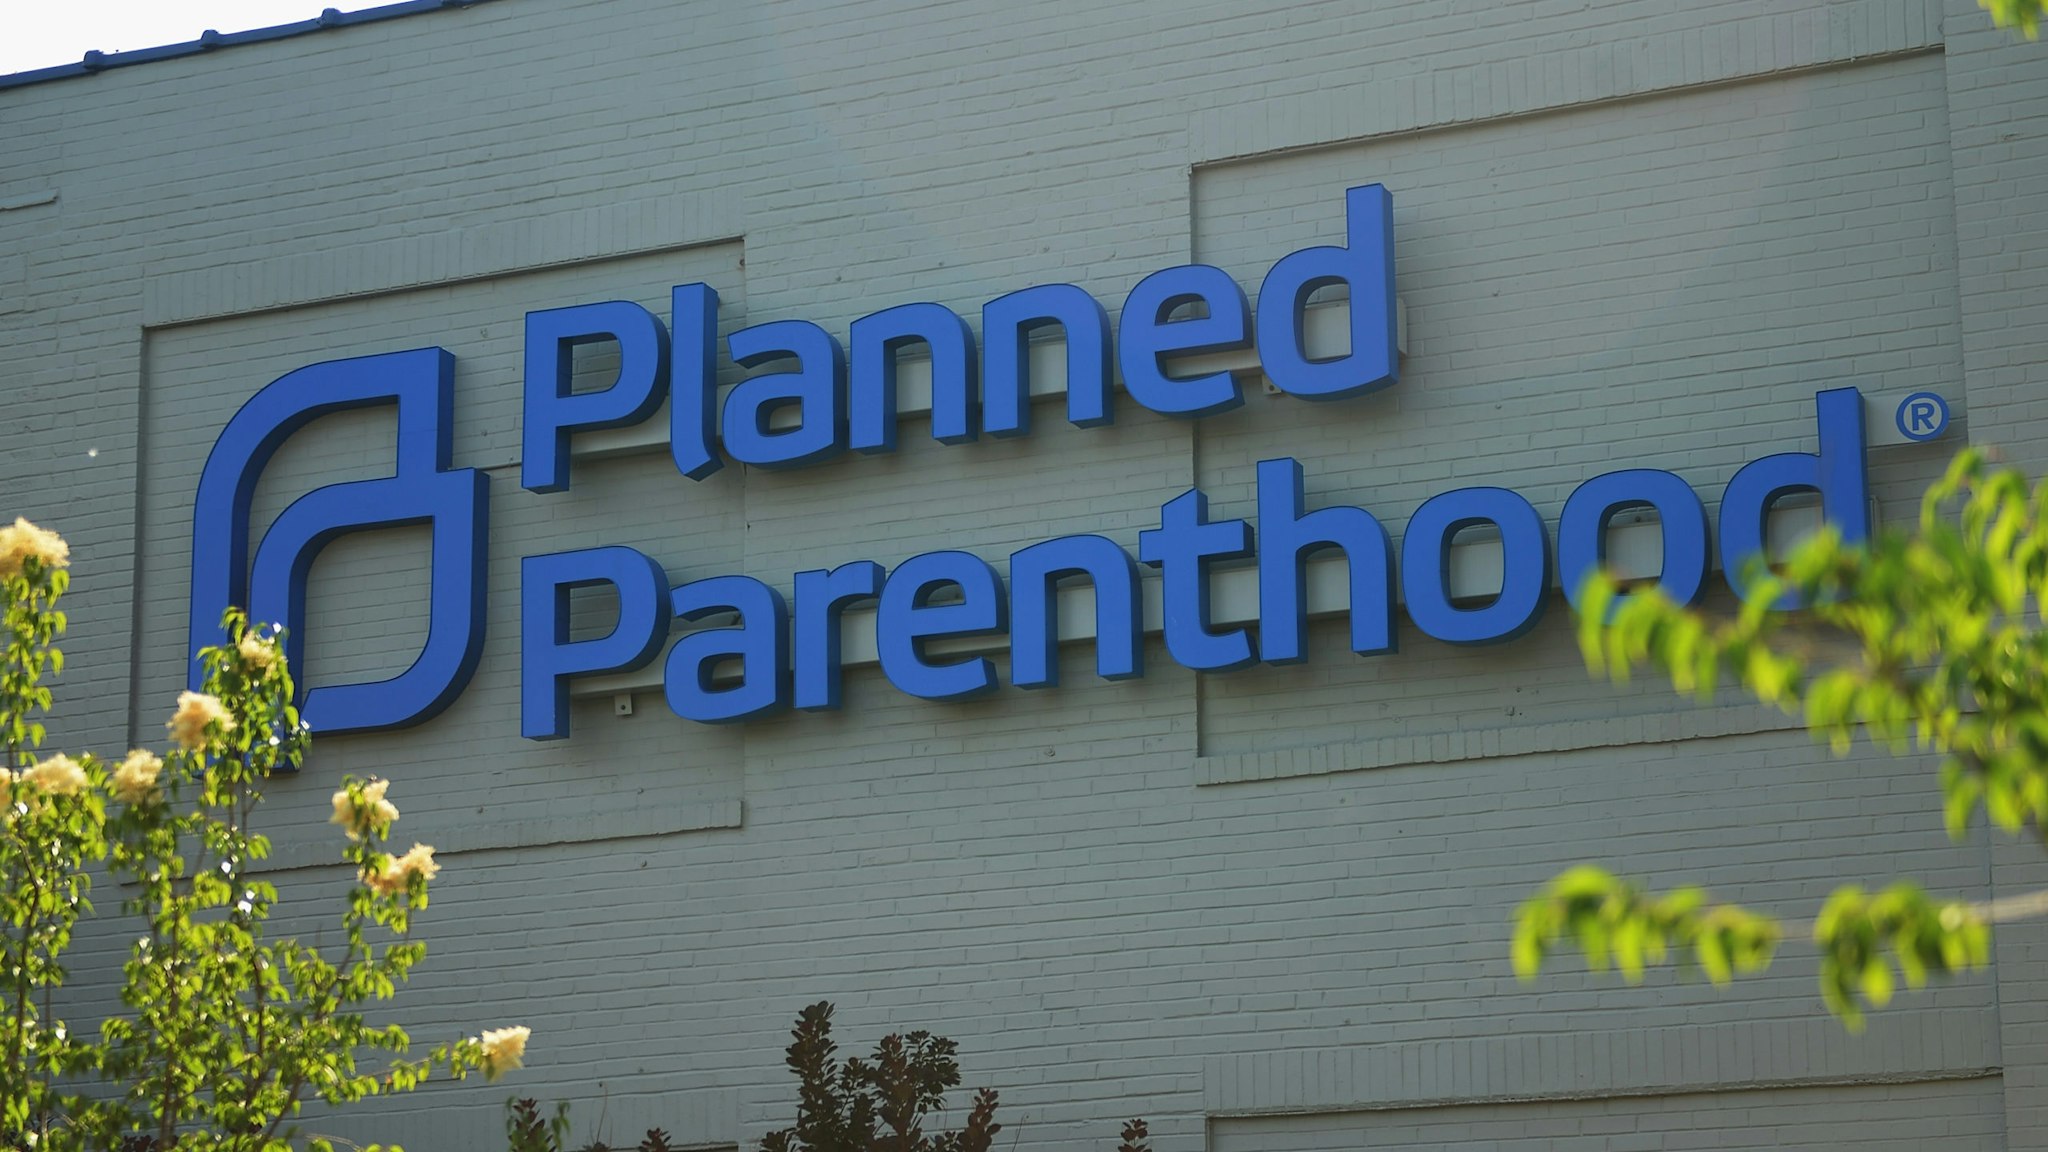 ST LOUIS, MO - MAY 31: The exterior of a Planned Parenthood Reproductive Health Services Center is seen on May 31, 2019 in St Louis, Missouri. In the wake of Missouri recent controversial abortion legislation, the states' last abortion clinic is being forced to close by the end of the week. Planned Parenthood is expected to go to court to try and stop the closing. (Photo by Michael Thomas/Getty Images)